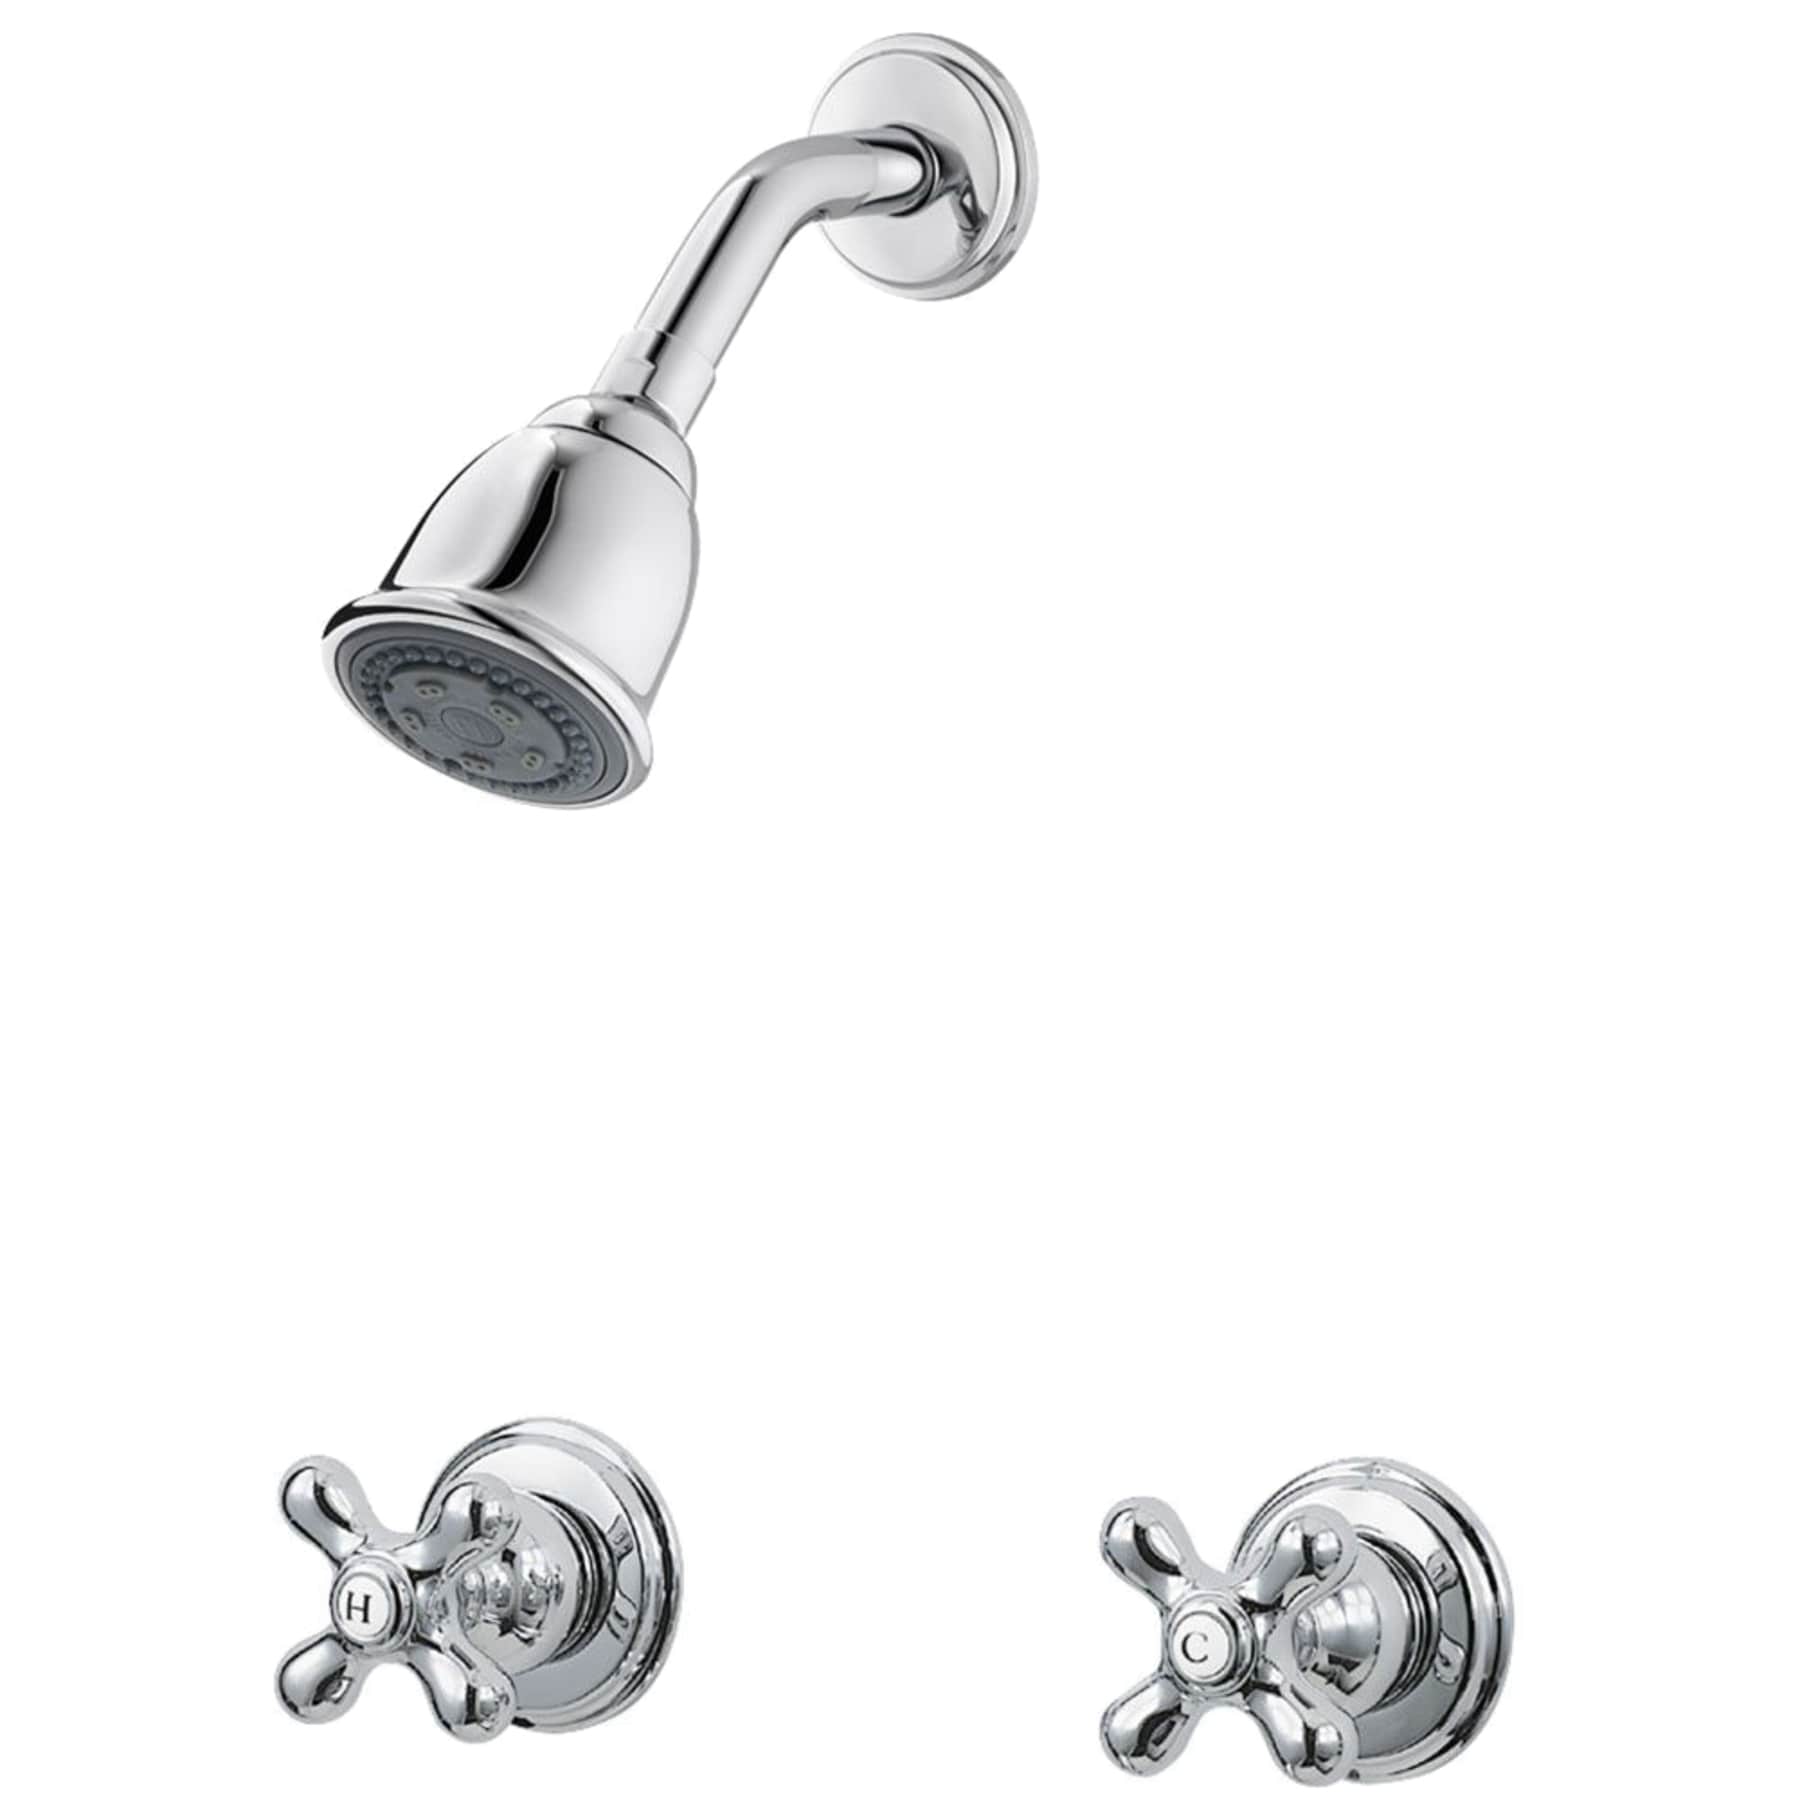 Pfister Polished Chrome 2-handle Shower Faucet Valve Included in 